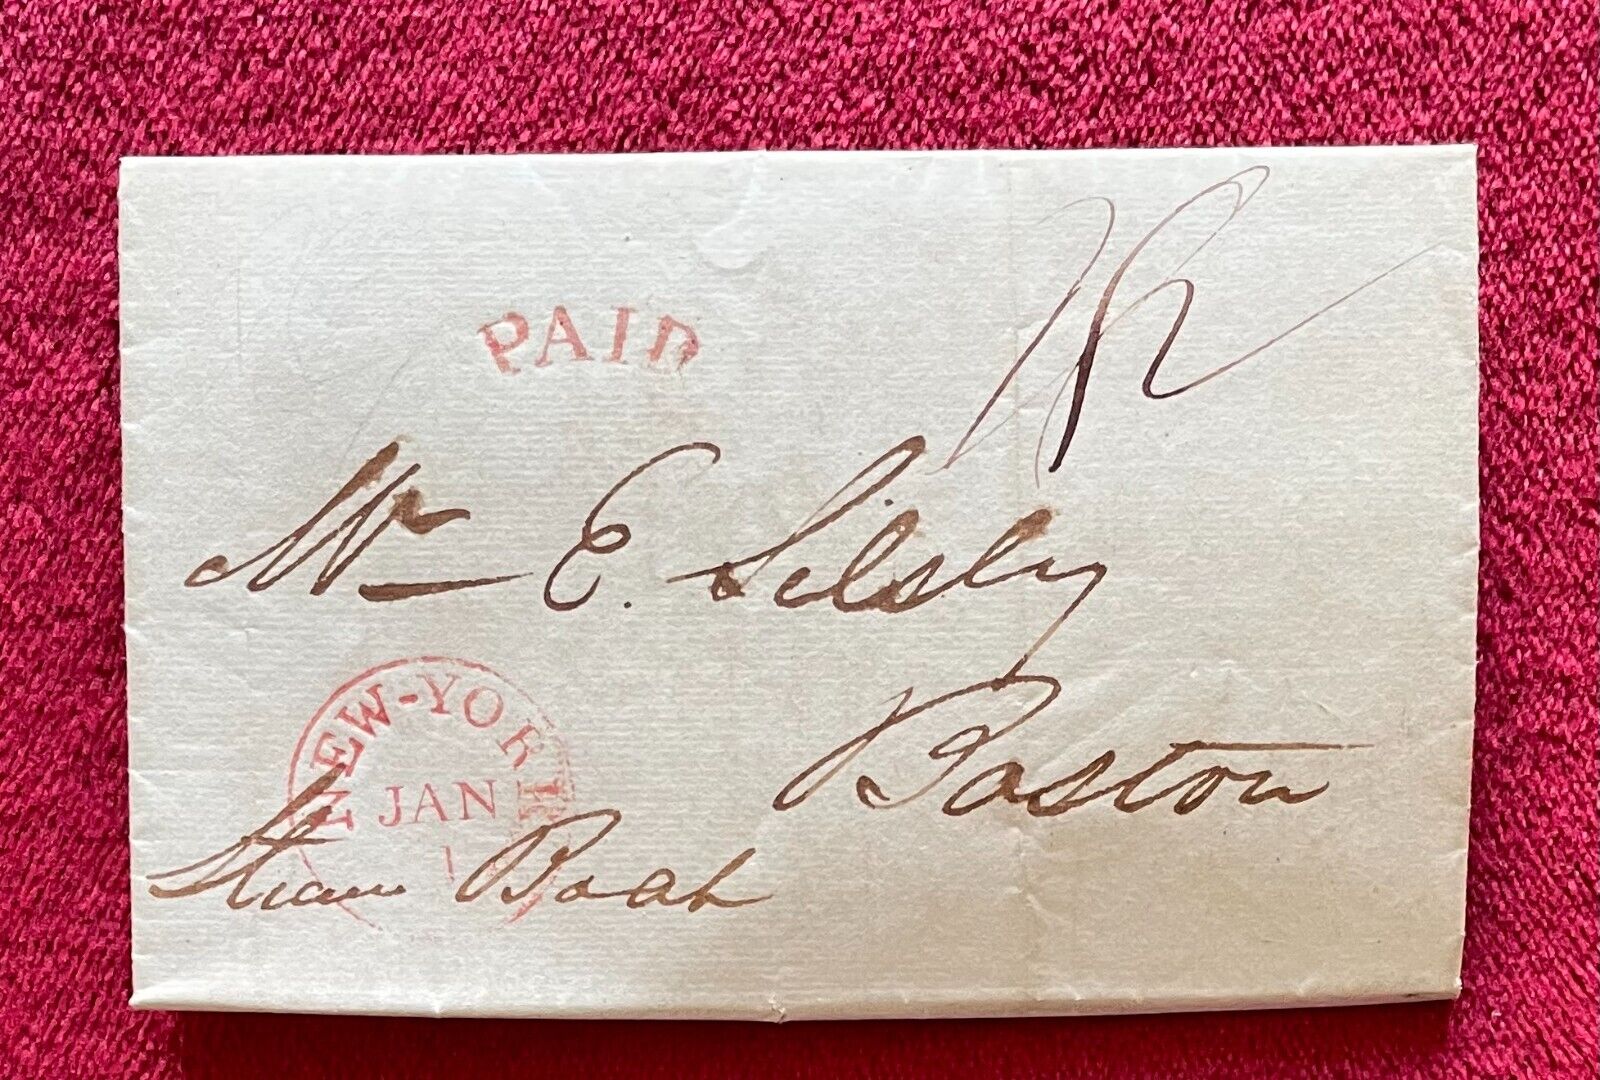 1838 STAMPLESS COVER/LETTER NEW YORK POSTMARK -IMPORTANT LETTER LOST IN THE MAIL